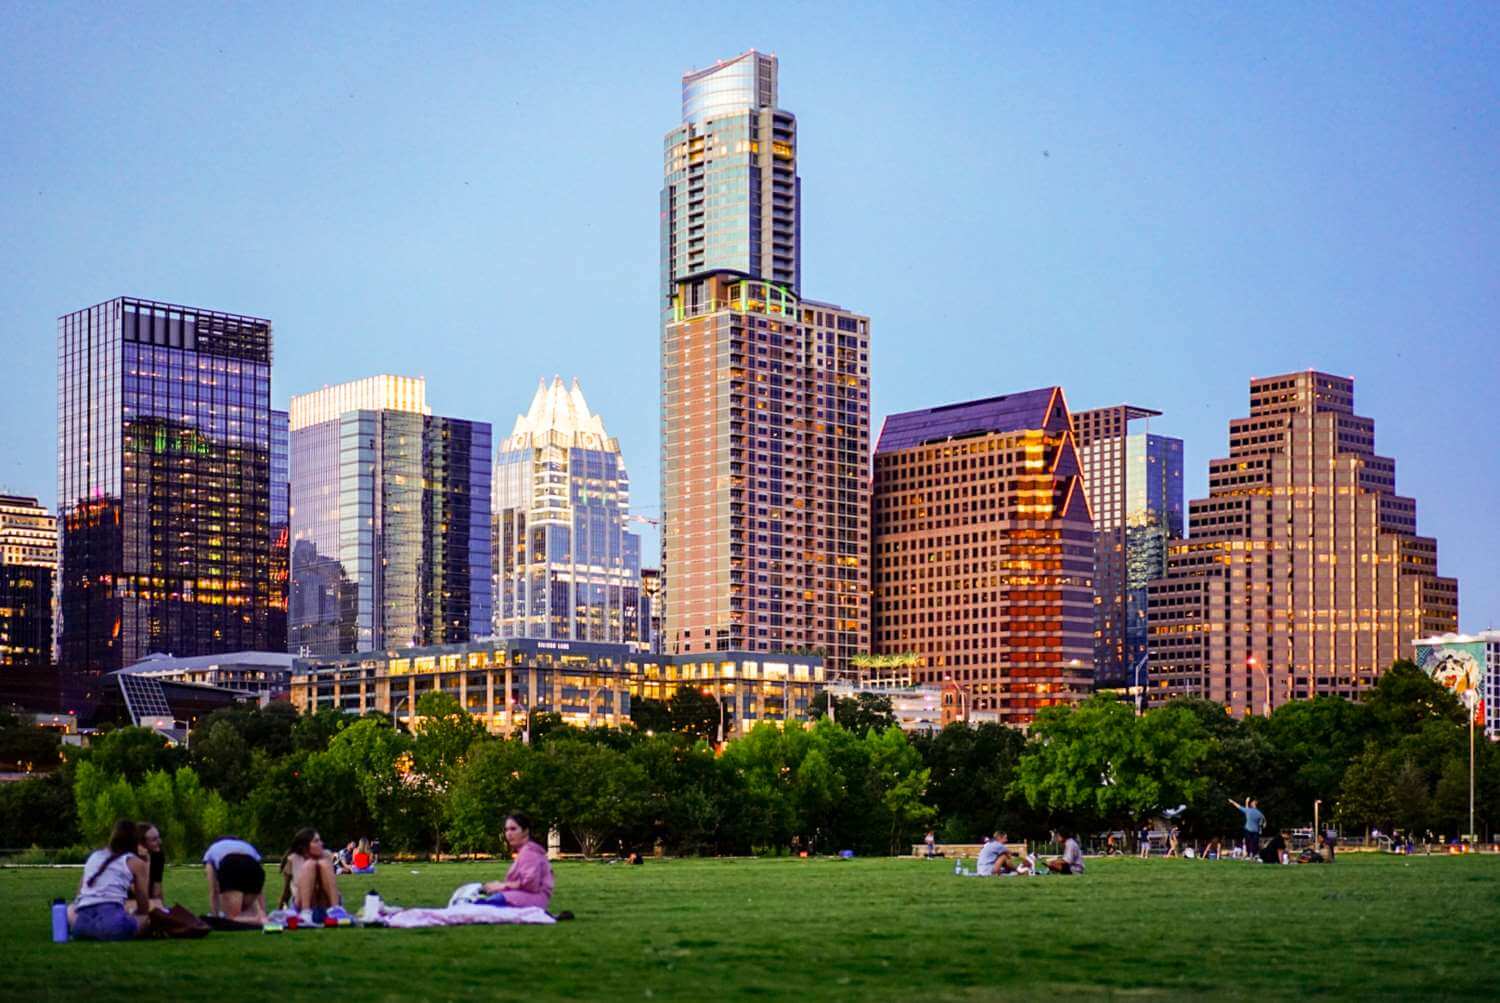 A view of the Austin, Texas skyline from a park with green grass & people..